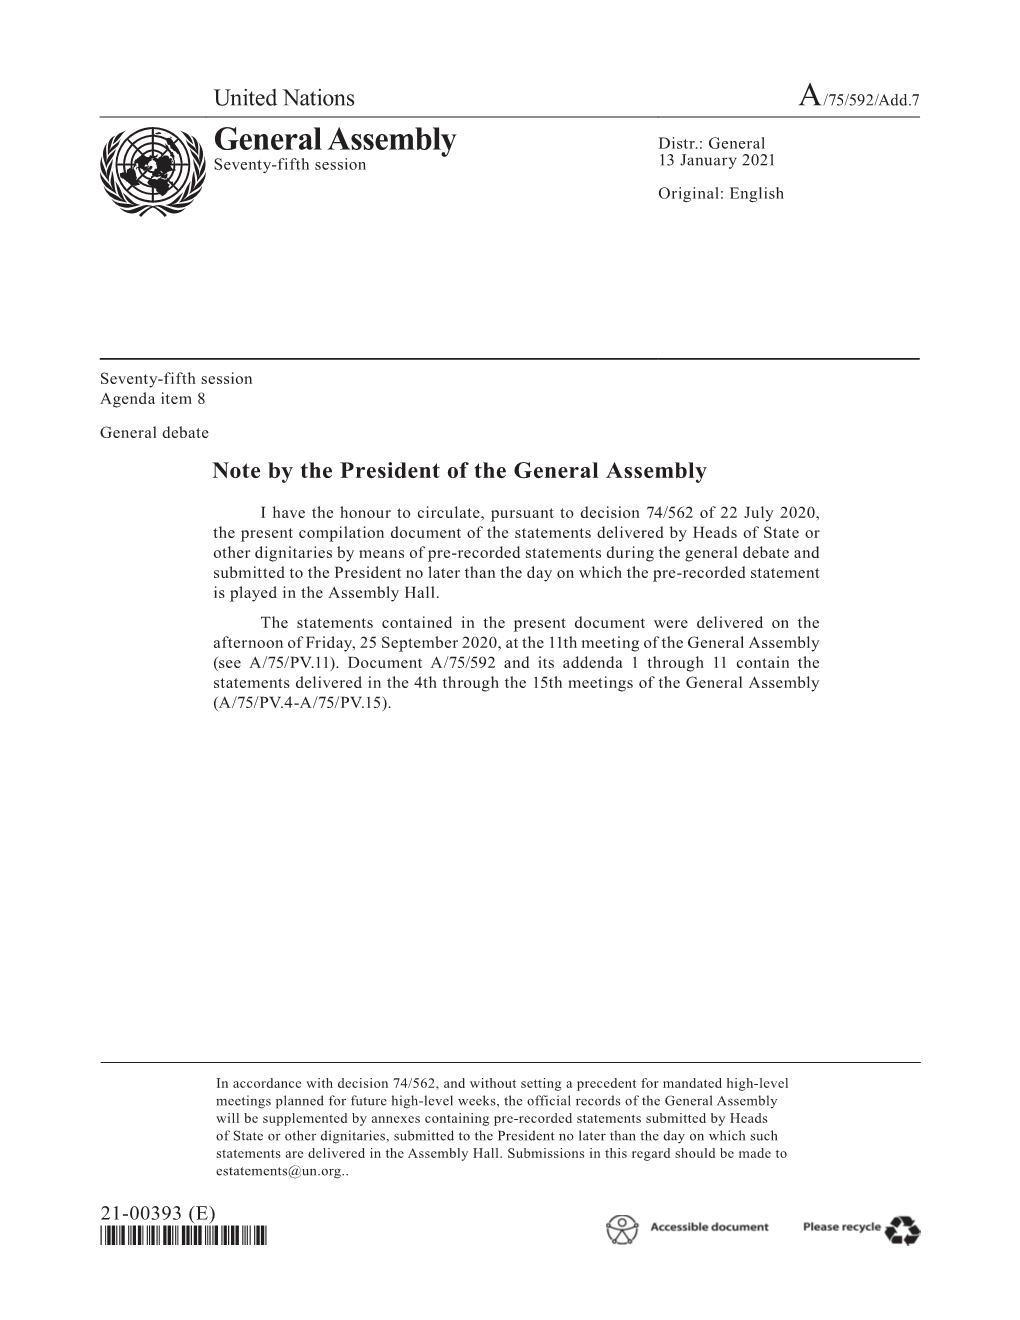 Note by the President of the General Assembly